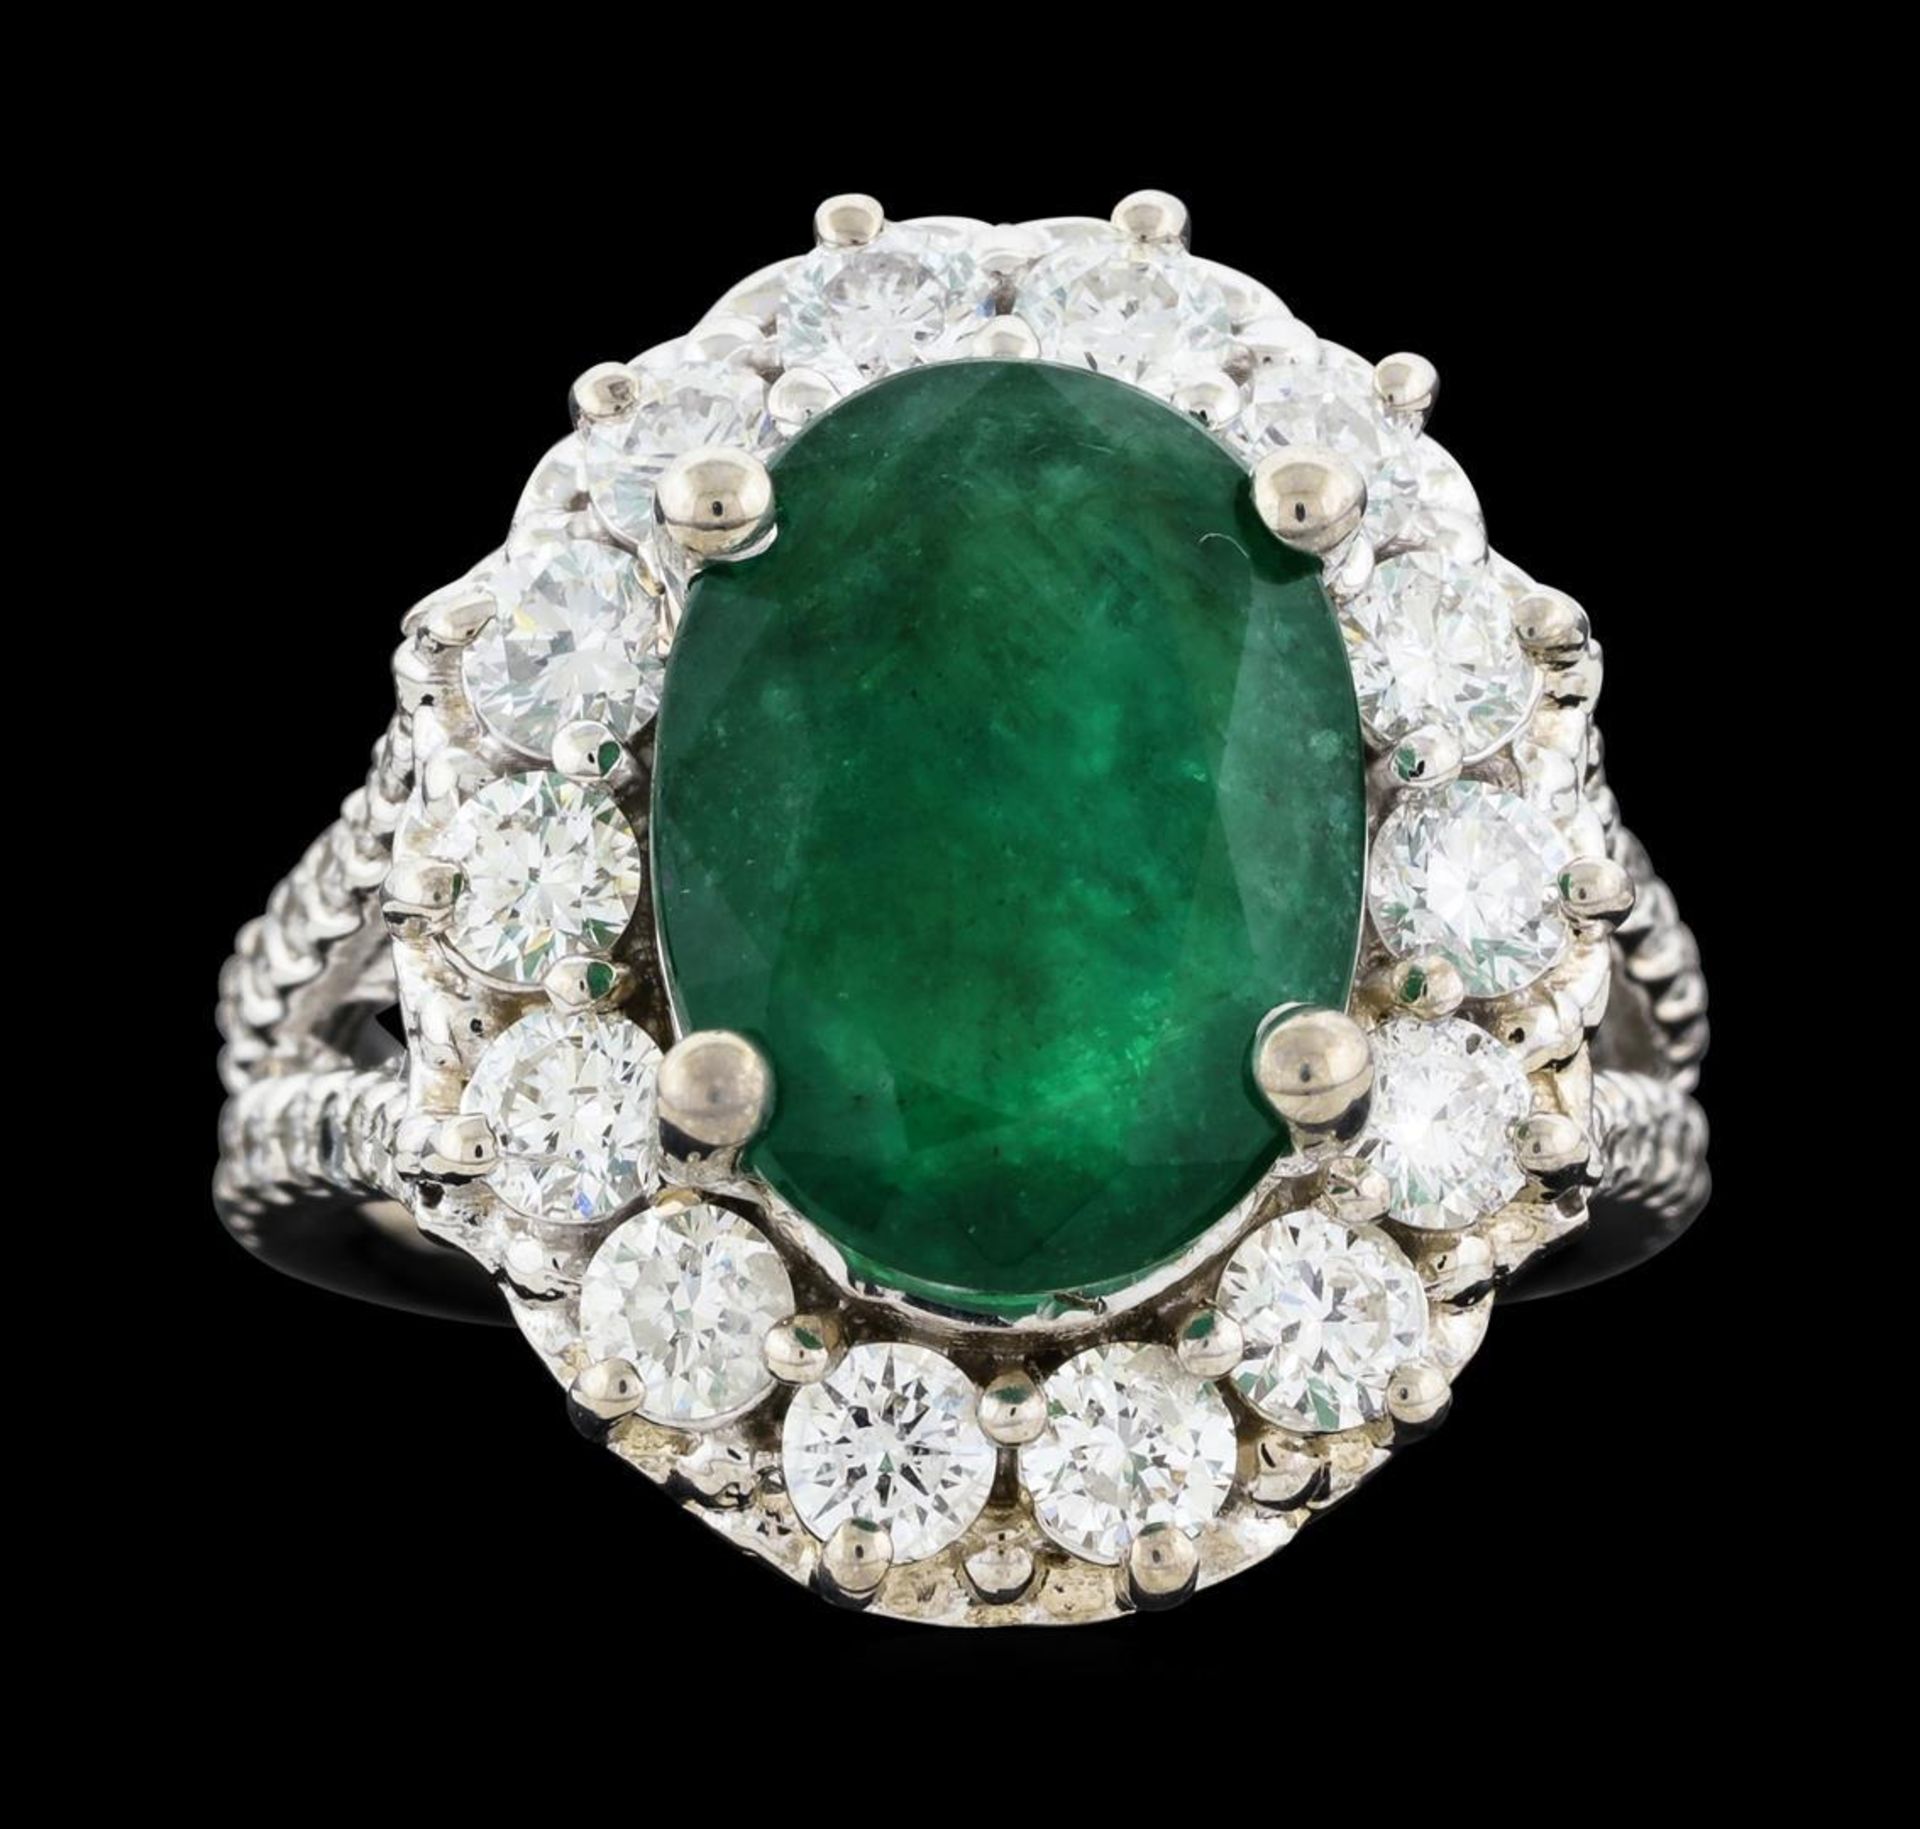 4.70 ctw Emerald and Diamond Ring - 14KT White Gold - Image 2 of 5